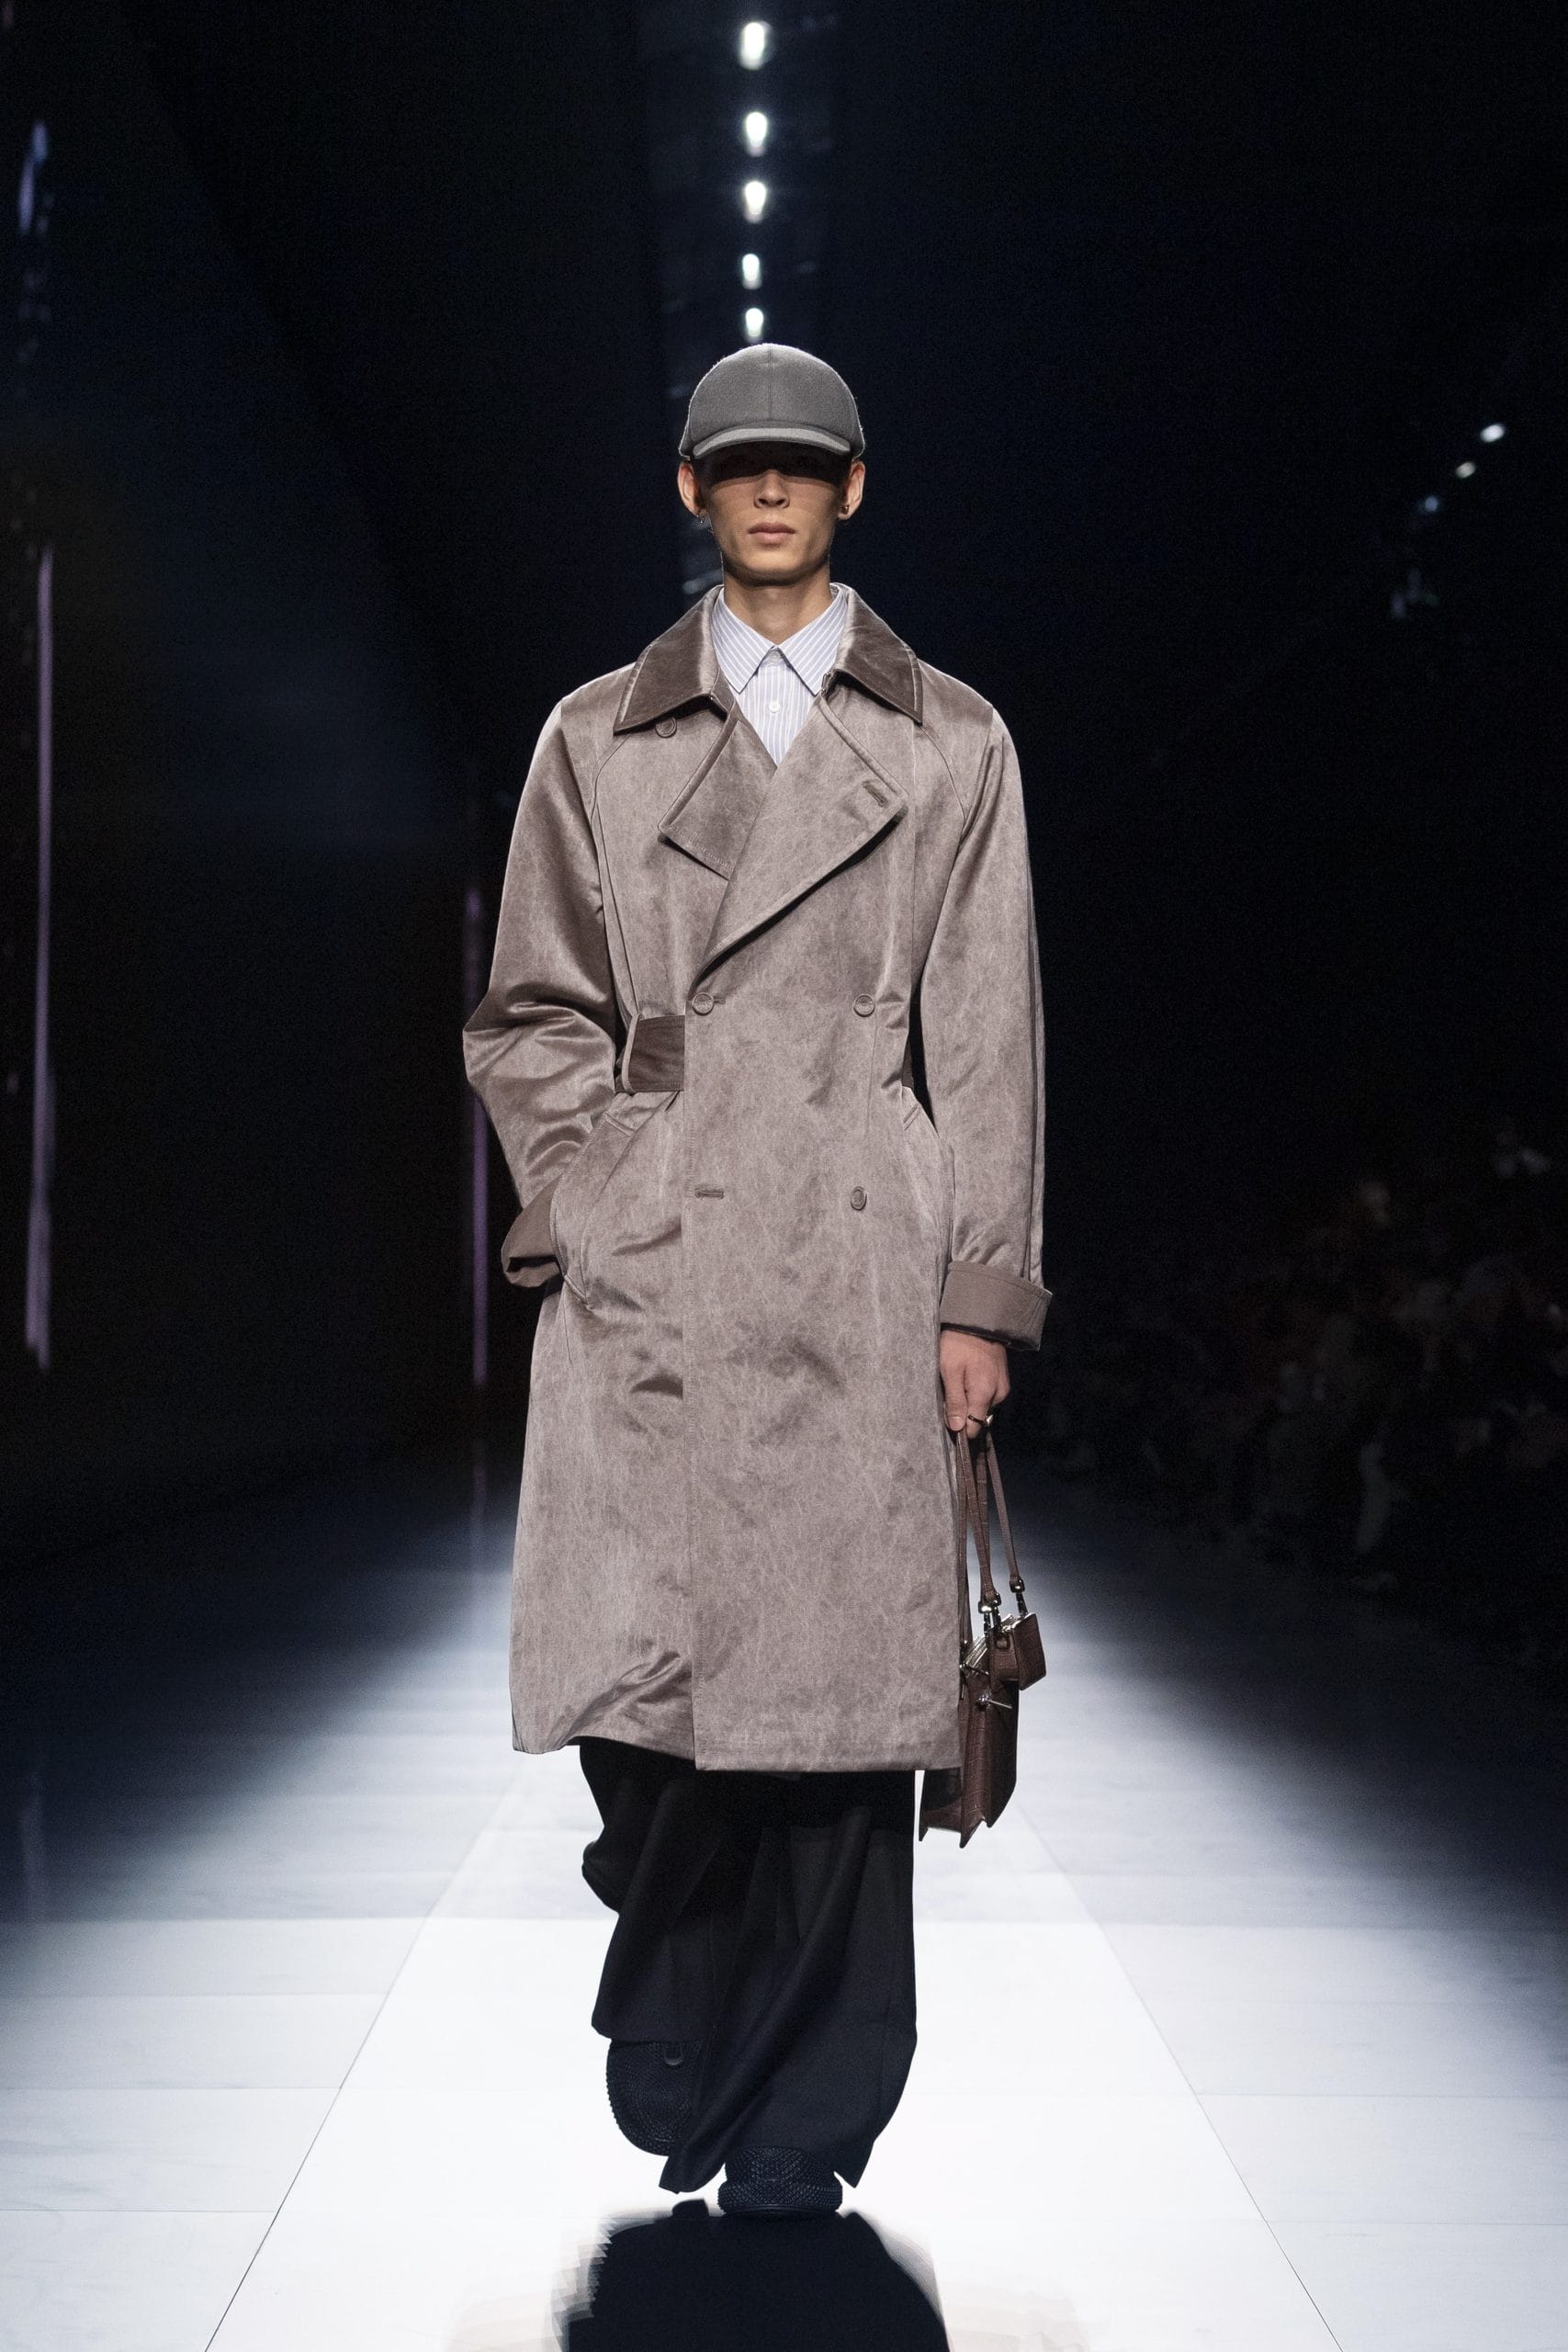 Suits you: Dior and Berluti top the class on Paris catwalk